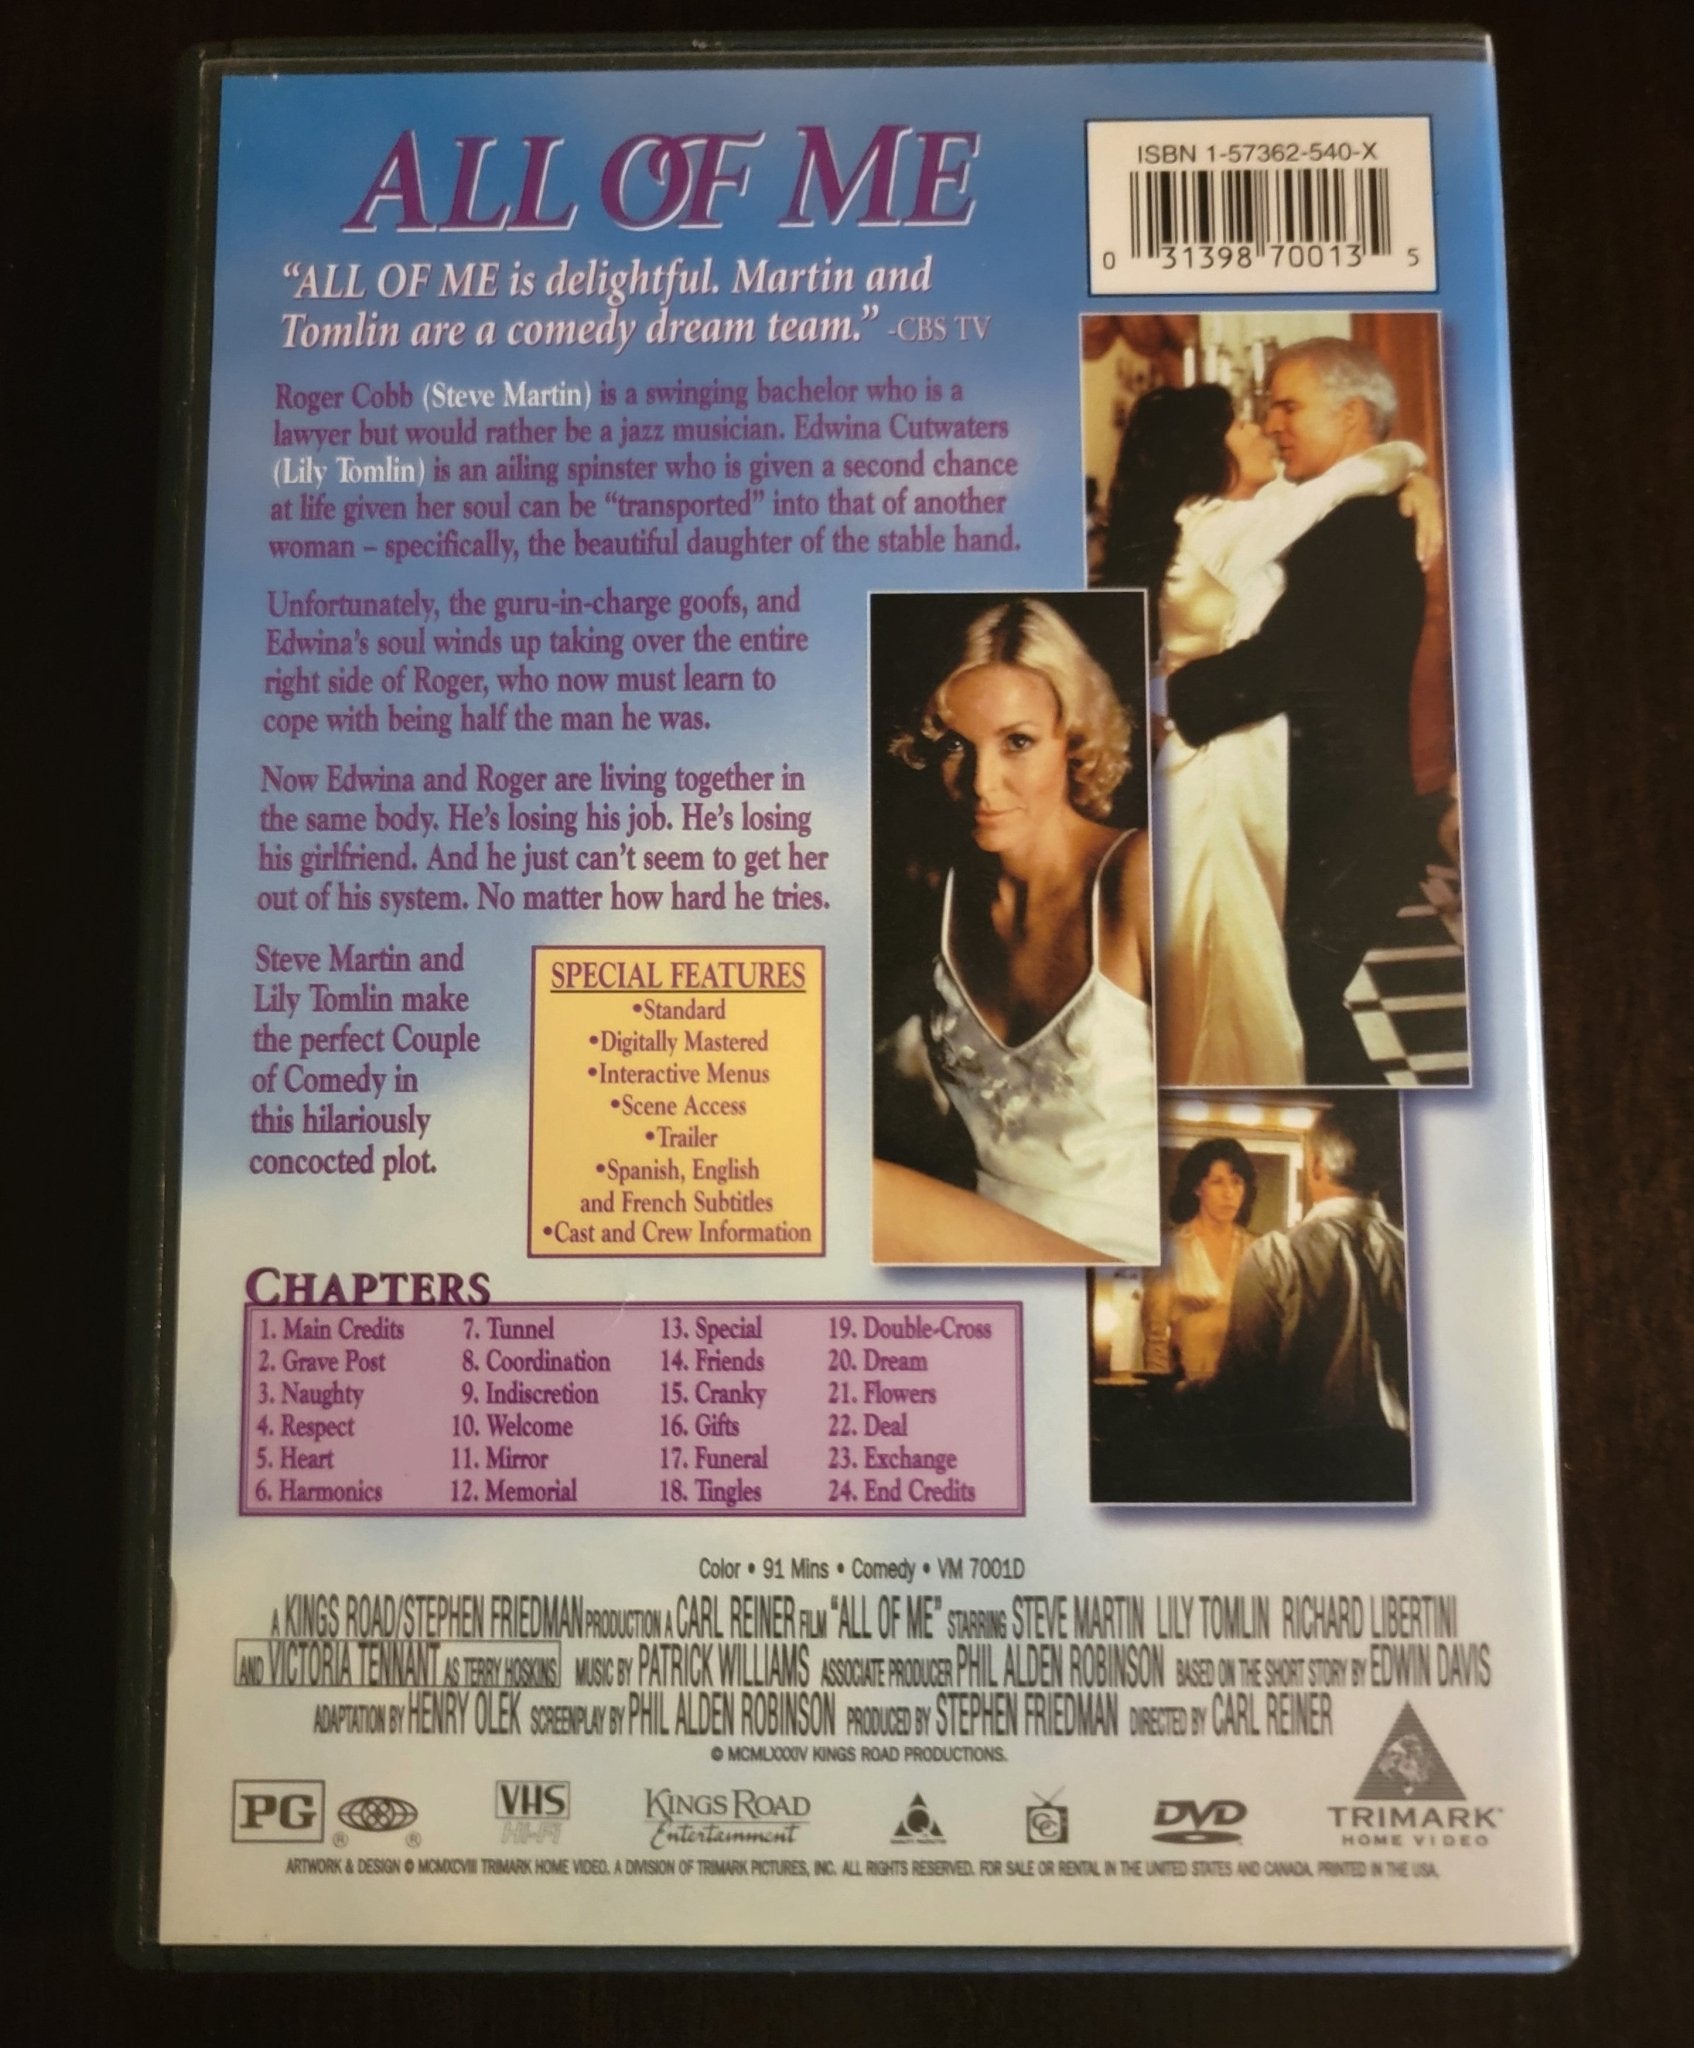 Trimark Home Videos - All of Me | DVD | Gold Reel Collection - DVD - Steady Bunny Shop